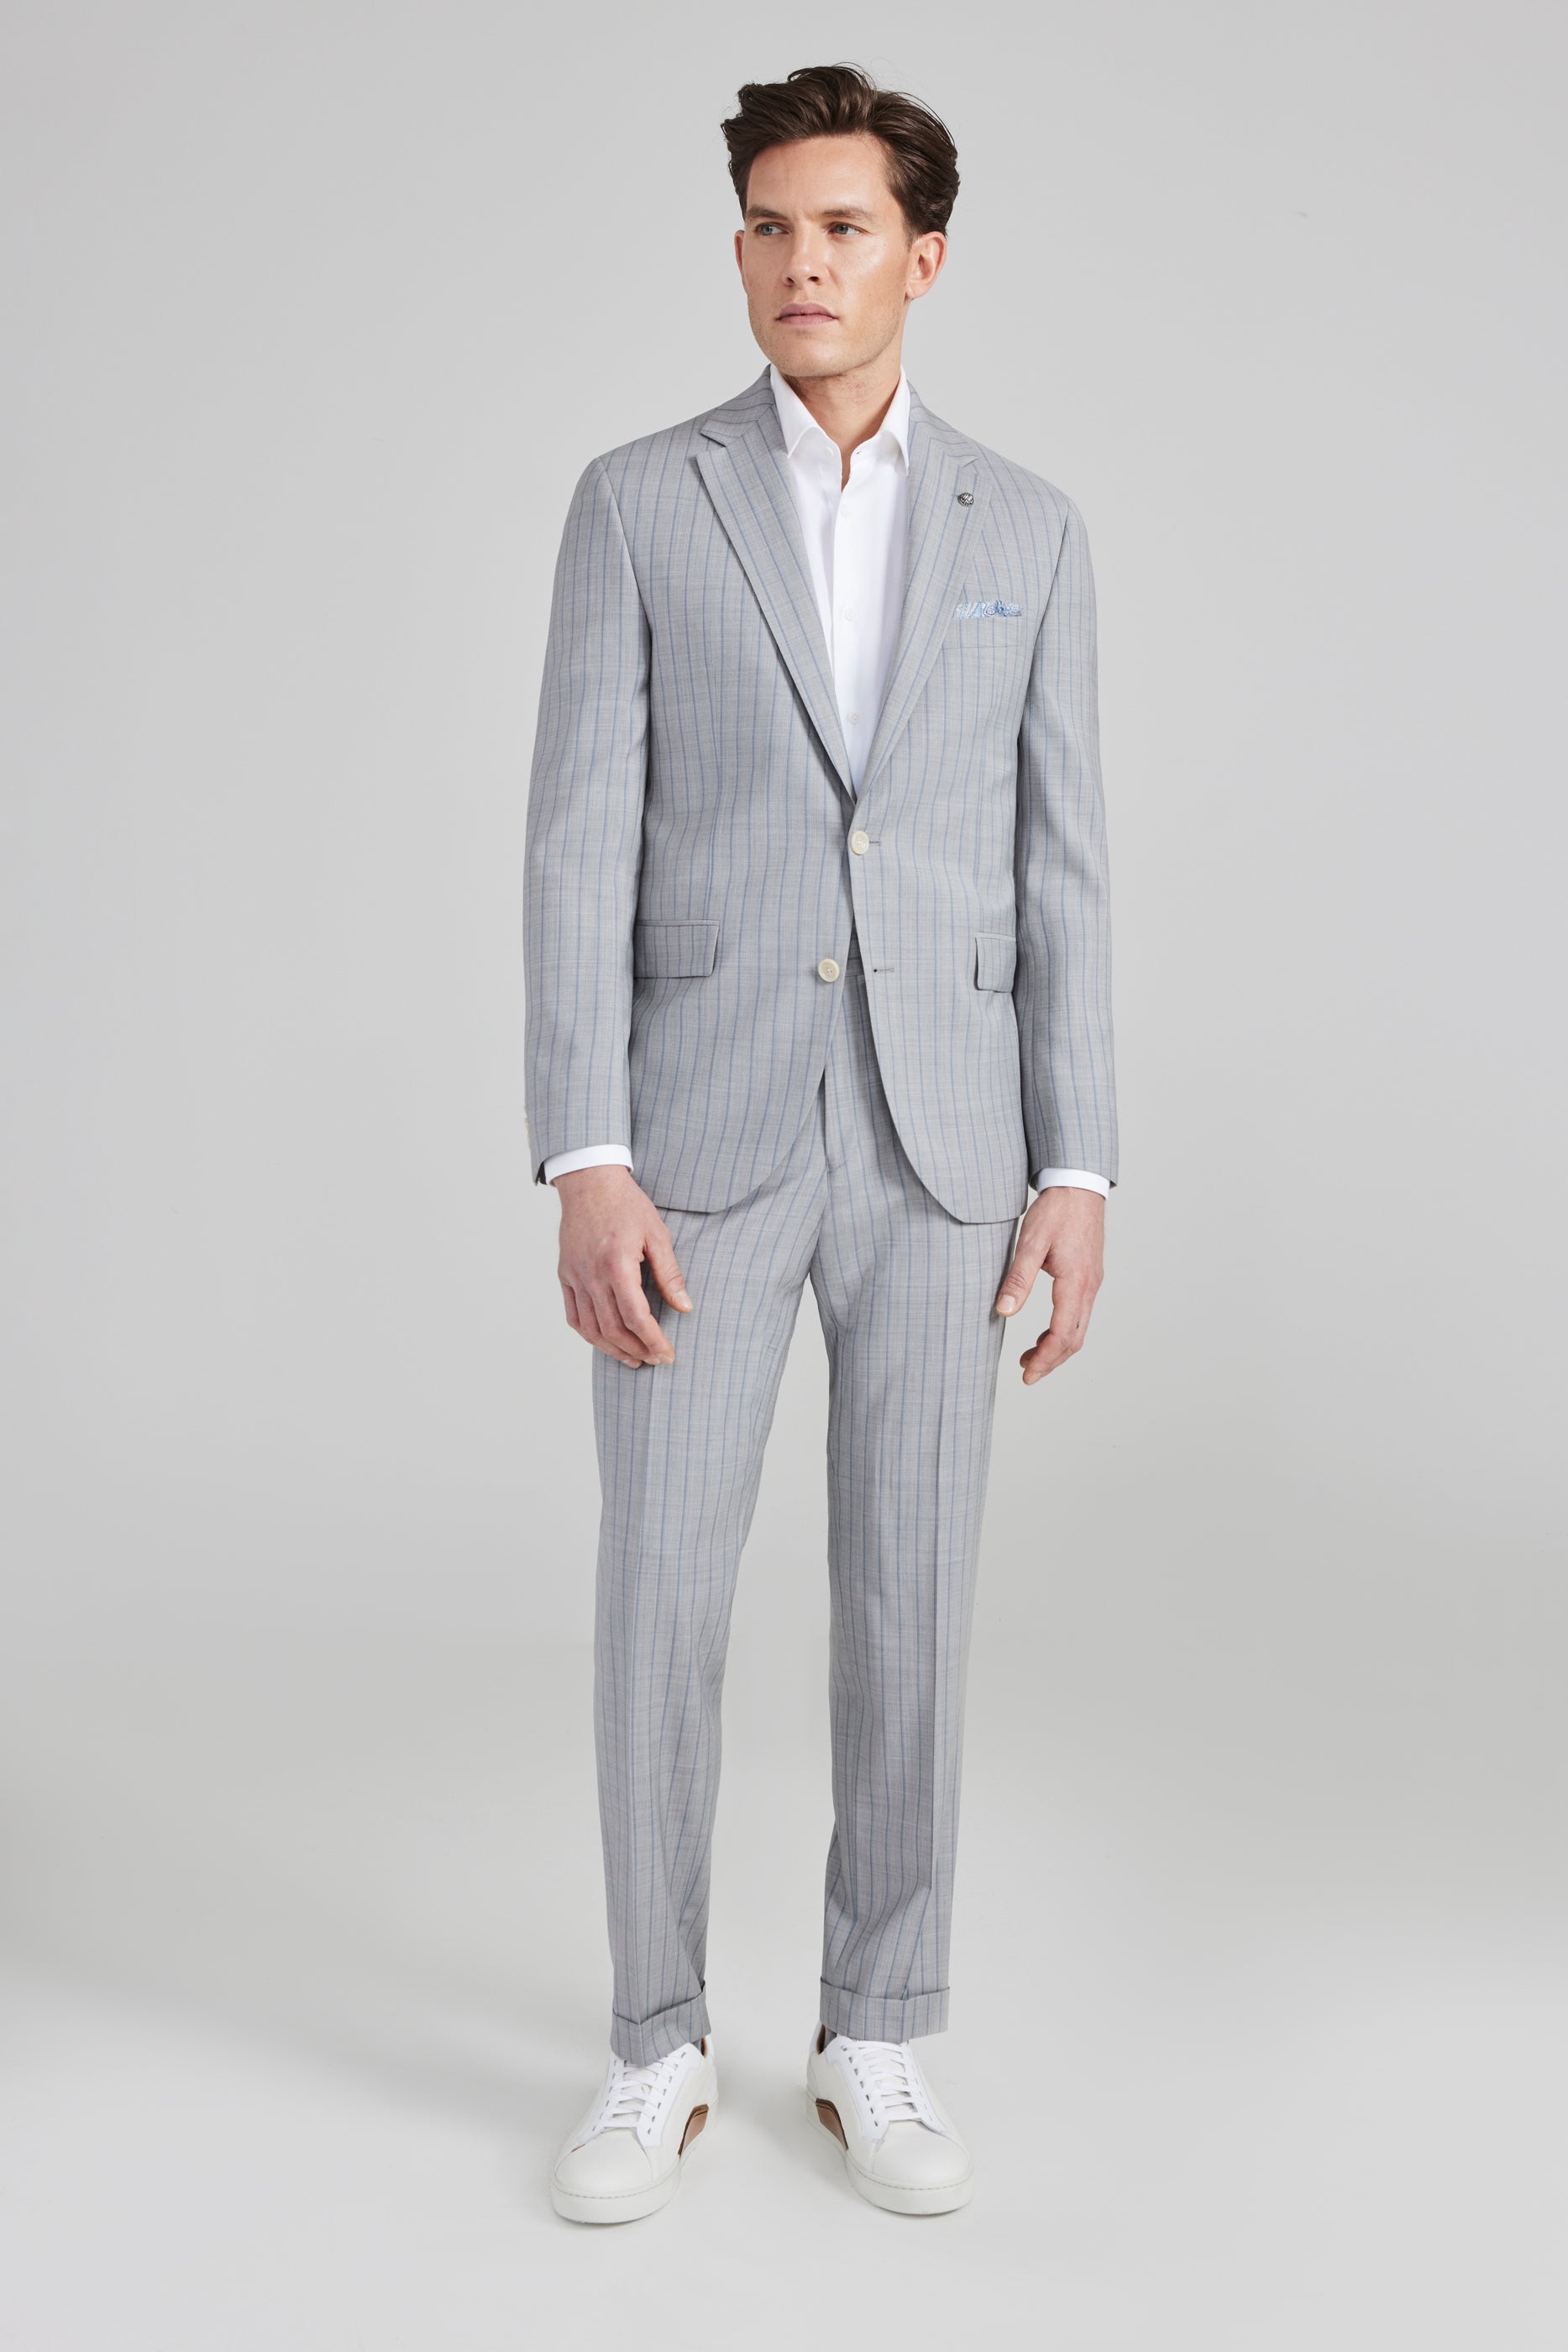 Alt view Esprit Pinstripe Wool Suit in Light Grey and Blue